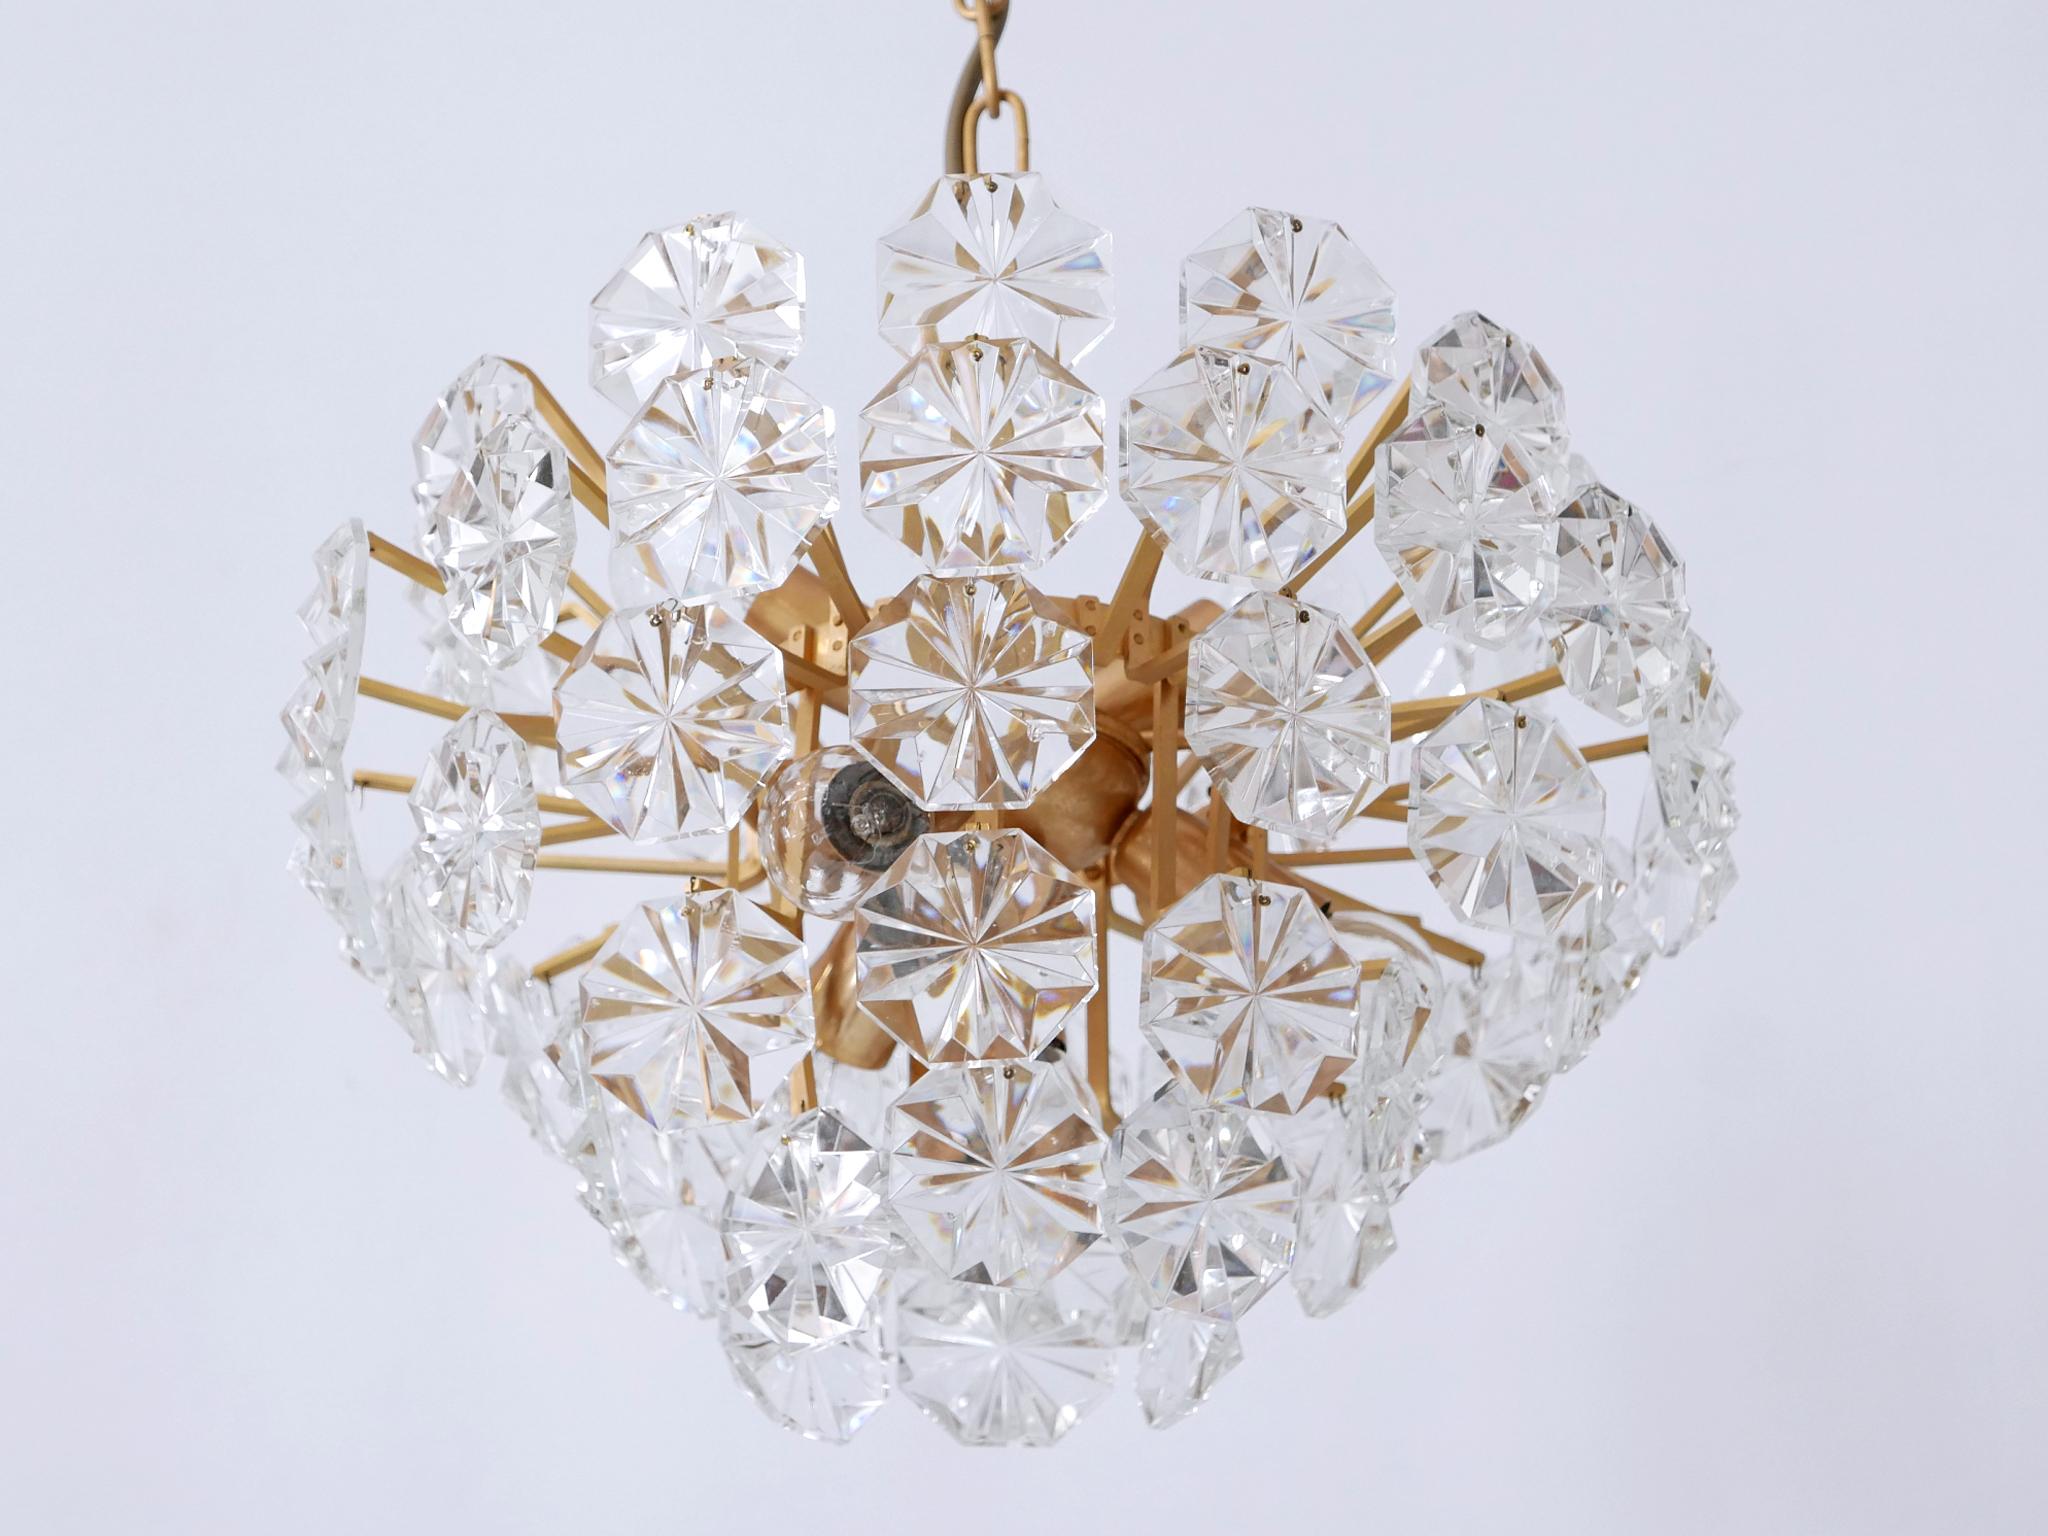 Elegant Mid Century Modern Crystal Chandelier by Christoph Palme Germany 1970s For Sale 3